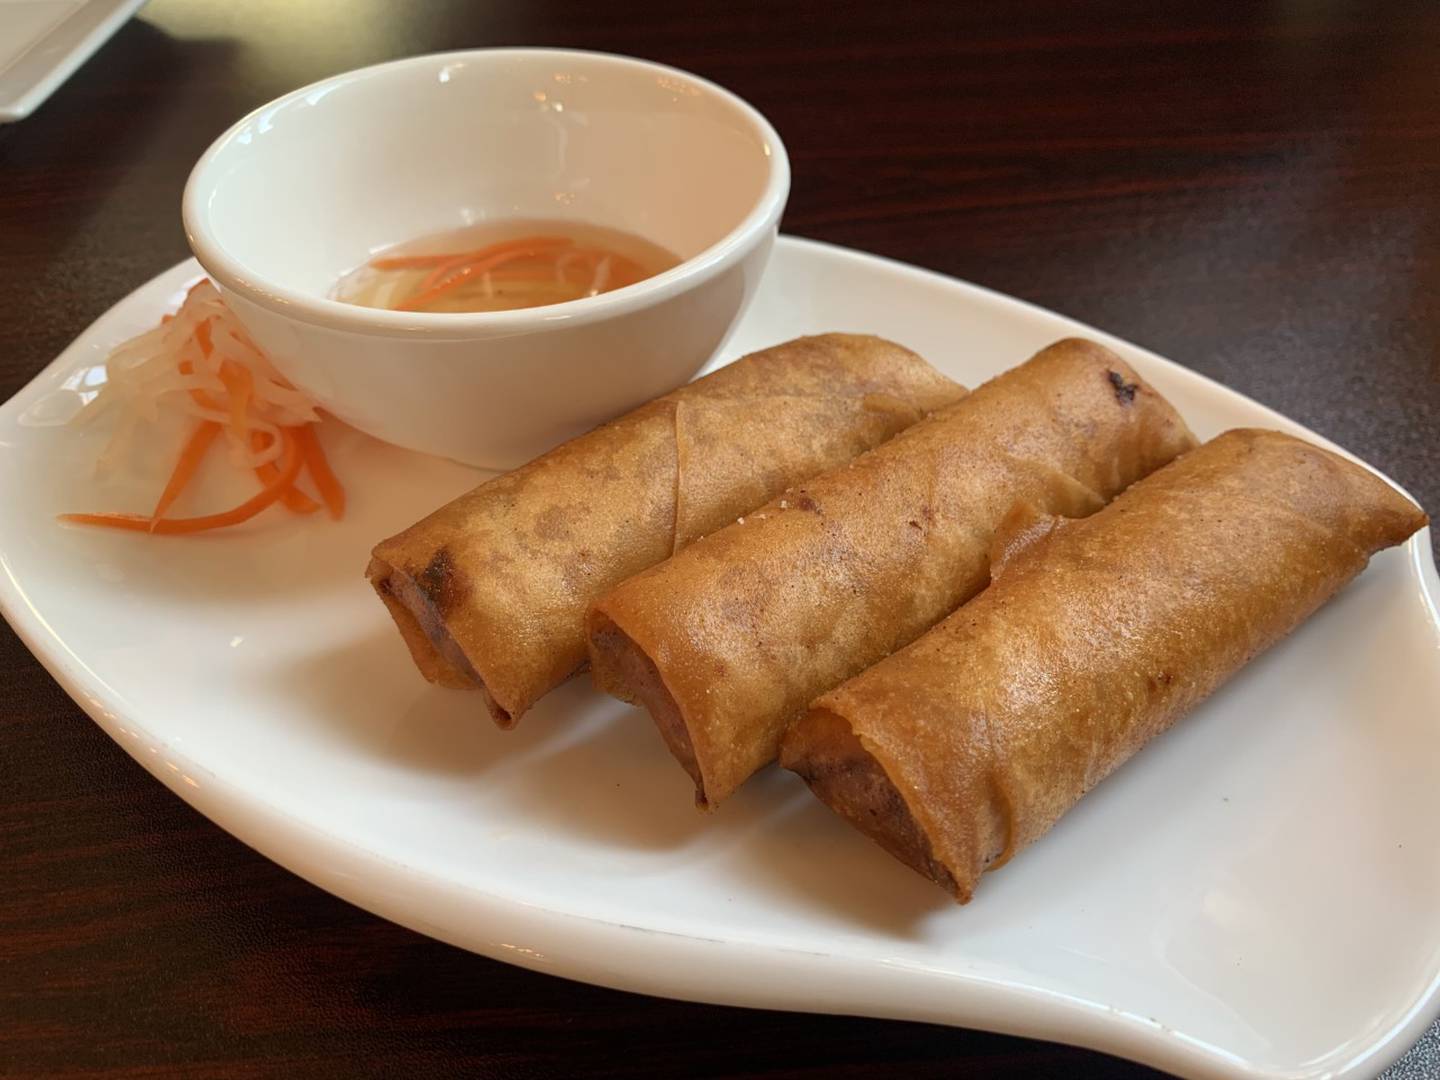 Egg rolls at Pho Ly in St. Charles.